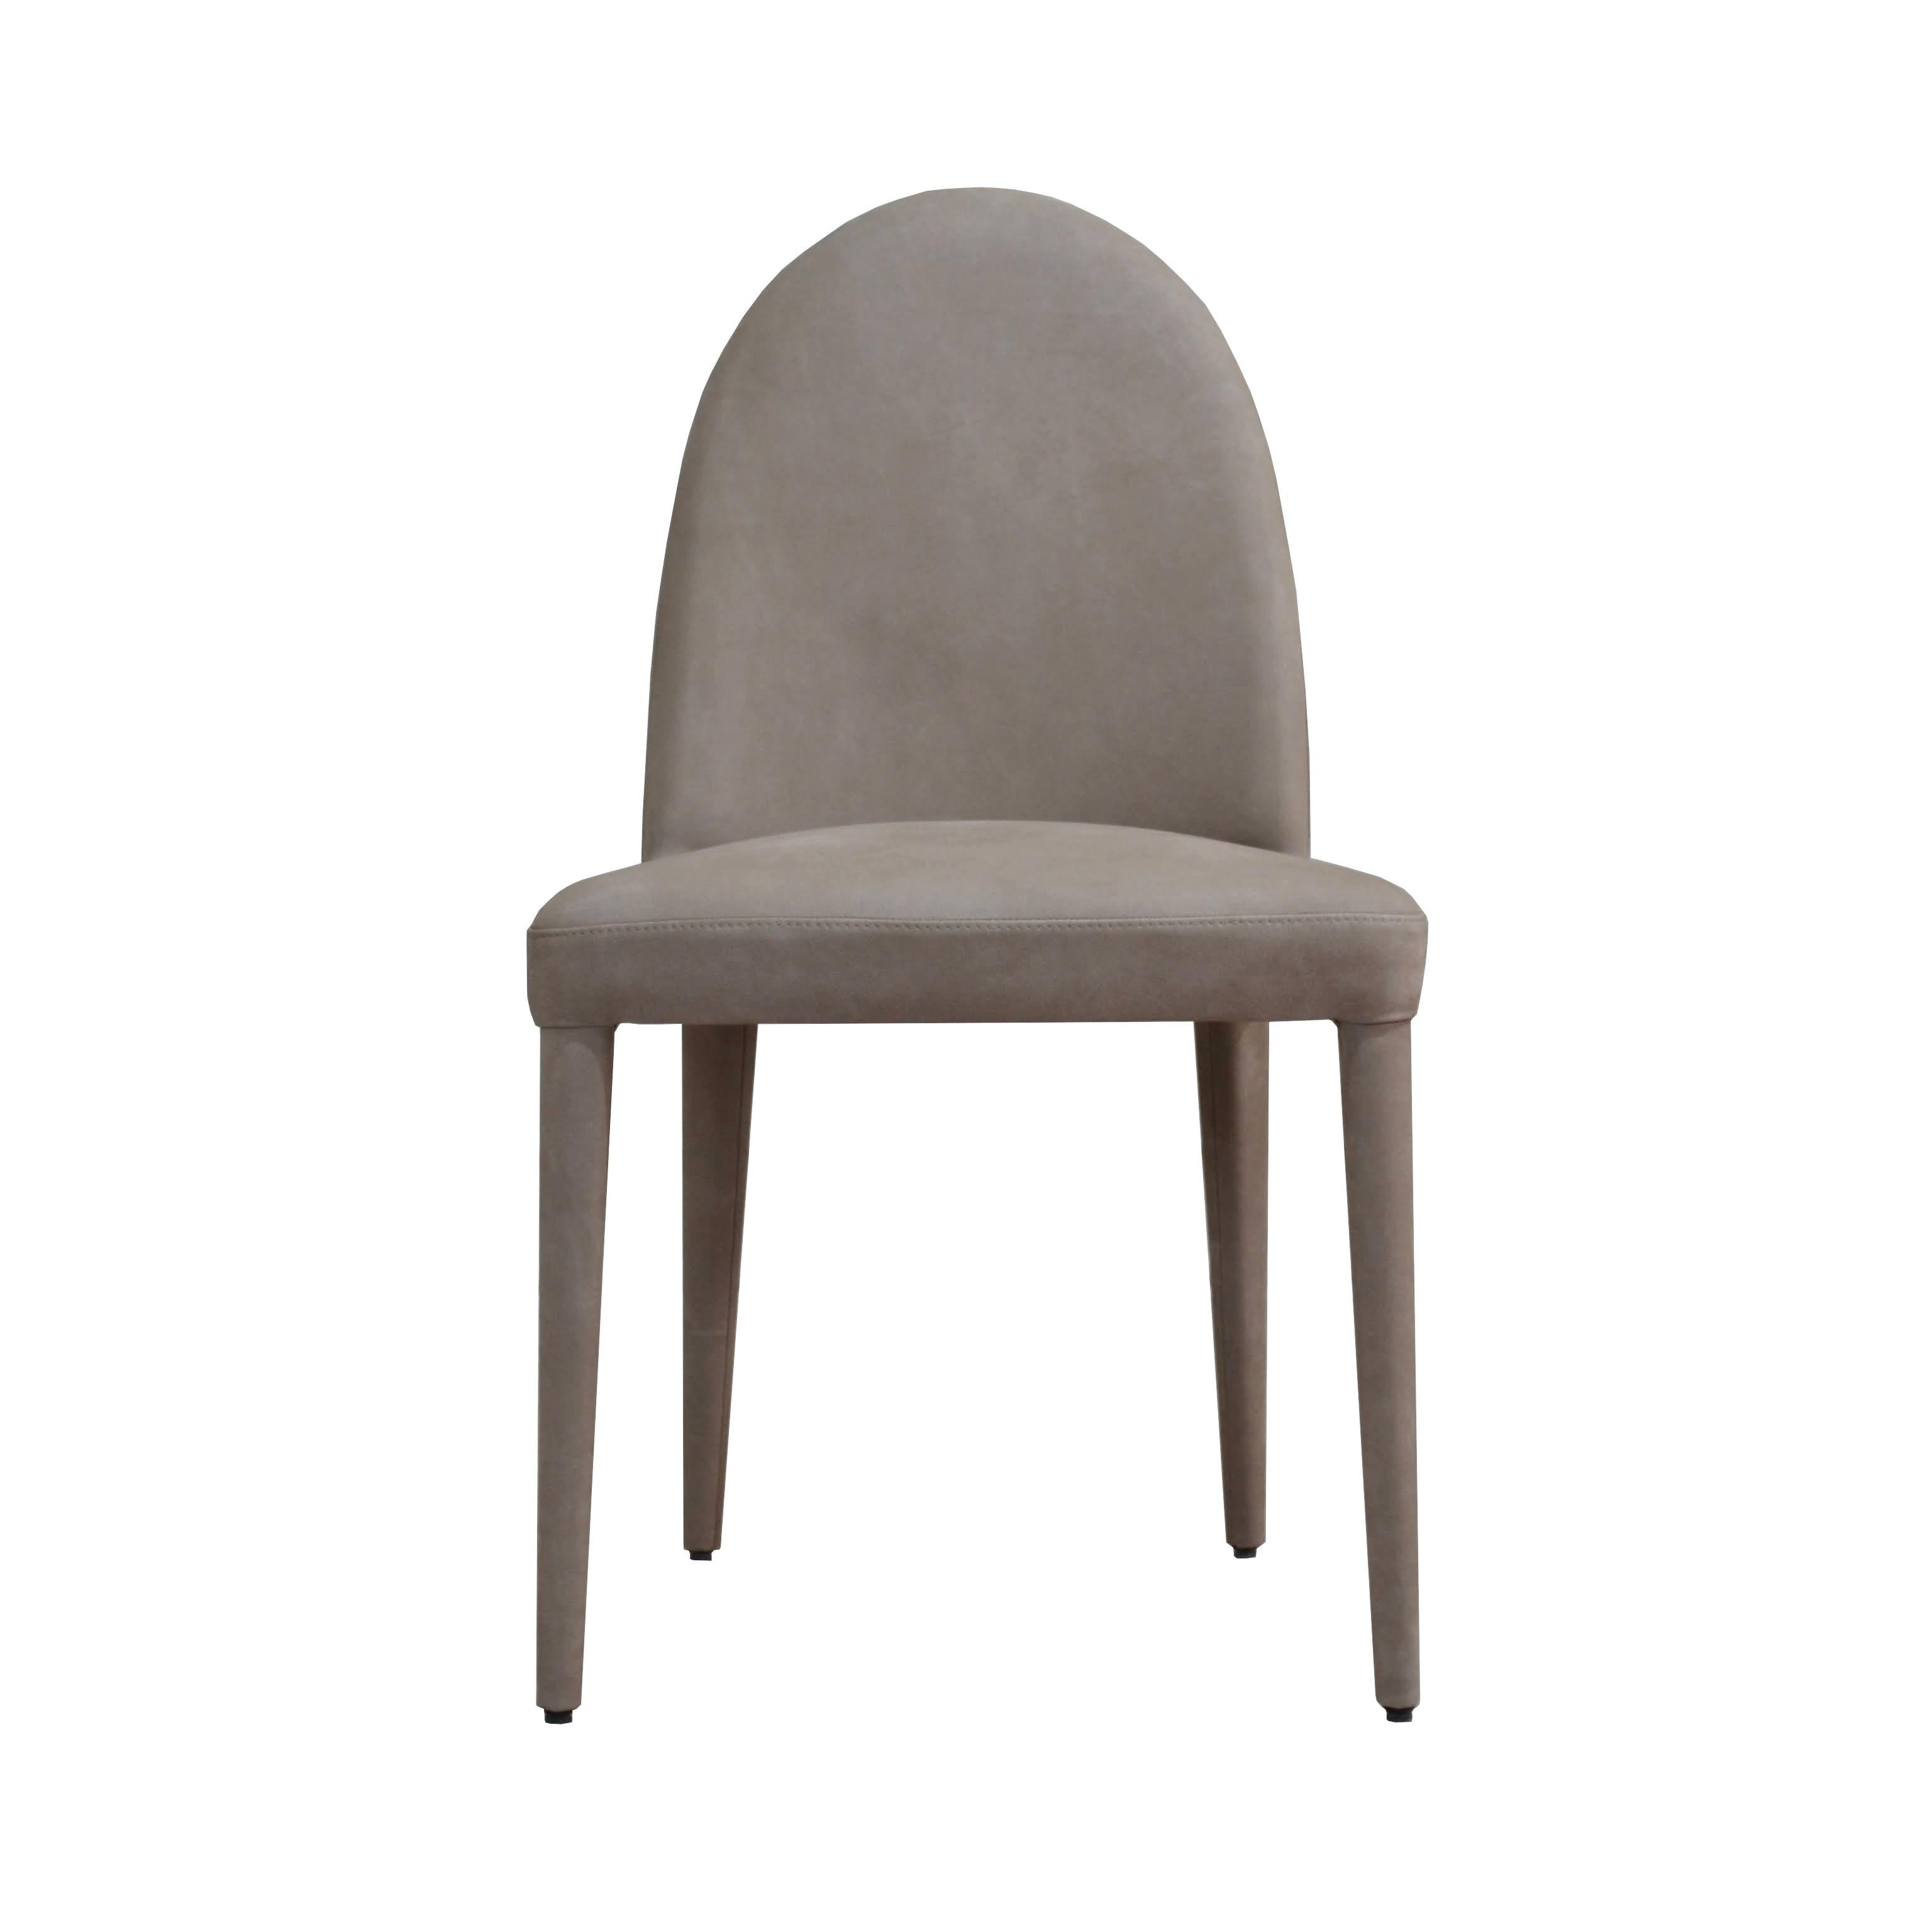 Timeless charm and simple elegance set this chair apart. Entirely upholstered, this design is a perfect balance of modern materials and Classic shapes, featuring slender legs, rounded backrest, and a spacious square seat. Versatile and comfortable,